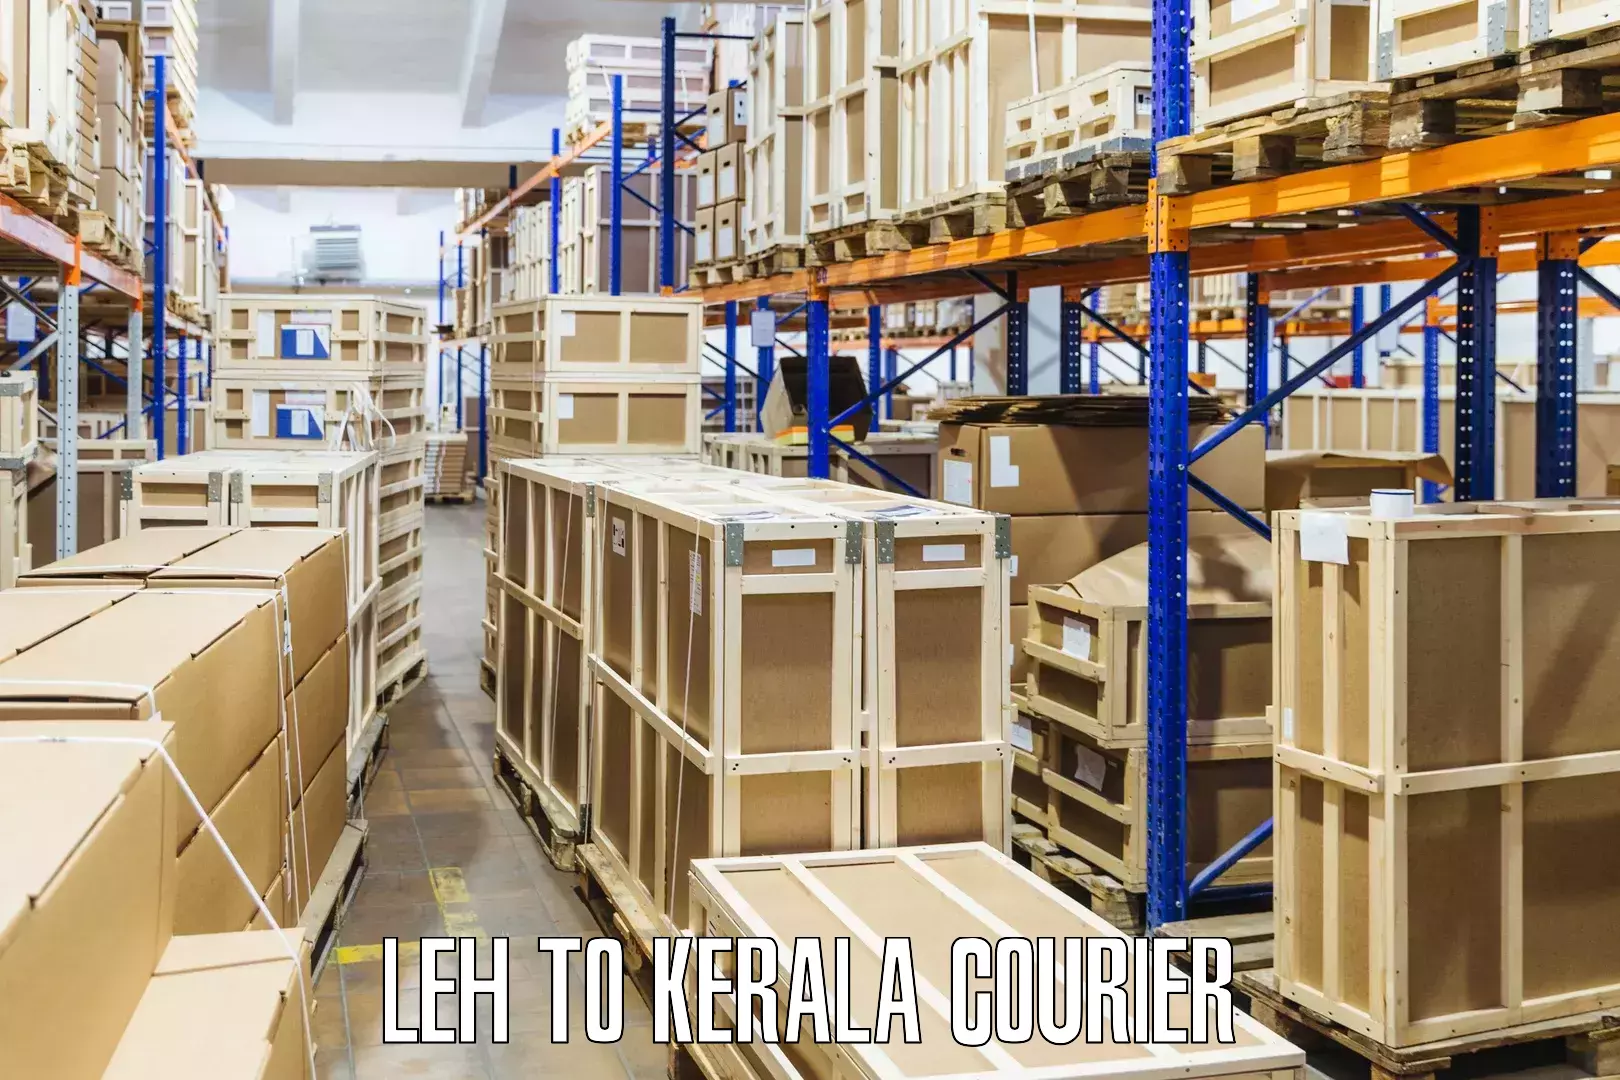 International courier networks Leh to Kerala